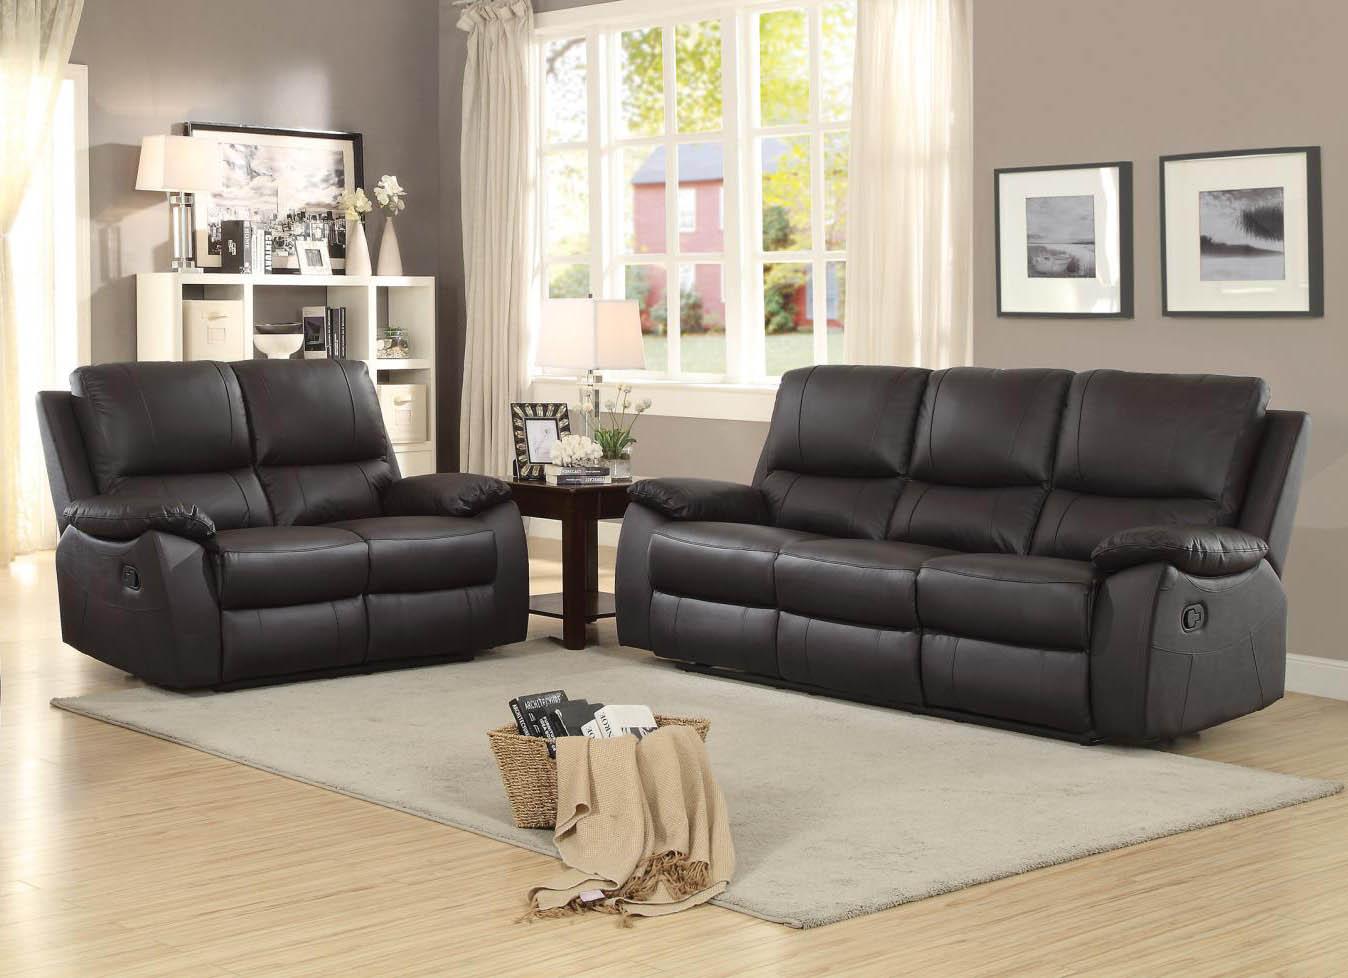 Contemporary, Modern Recliner Sofa Set Greeley 8325BRW-3+2 in Brown Top grain leather